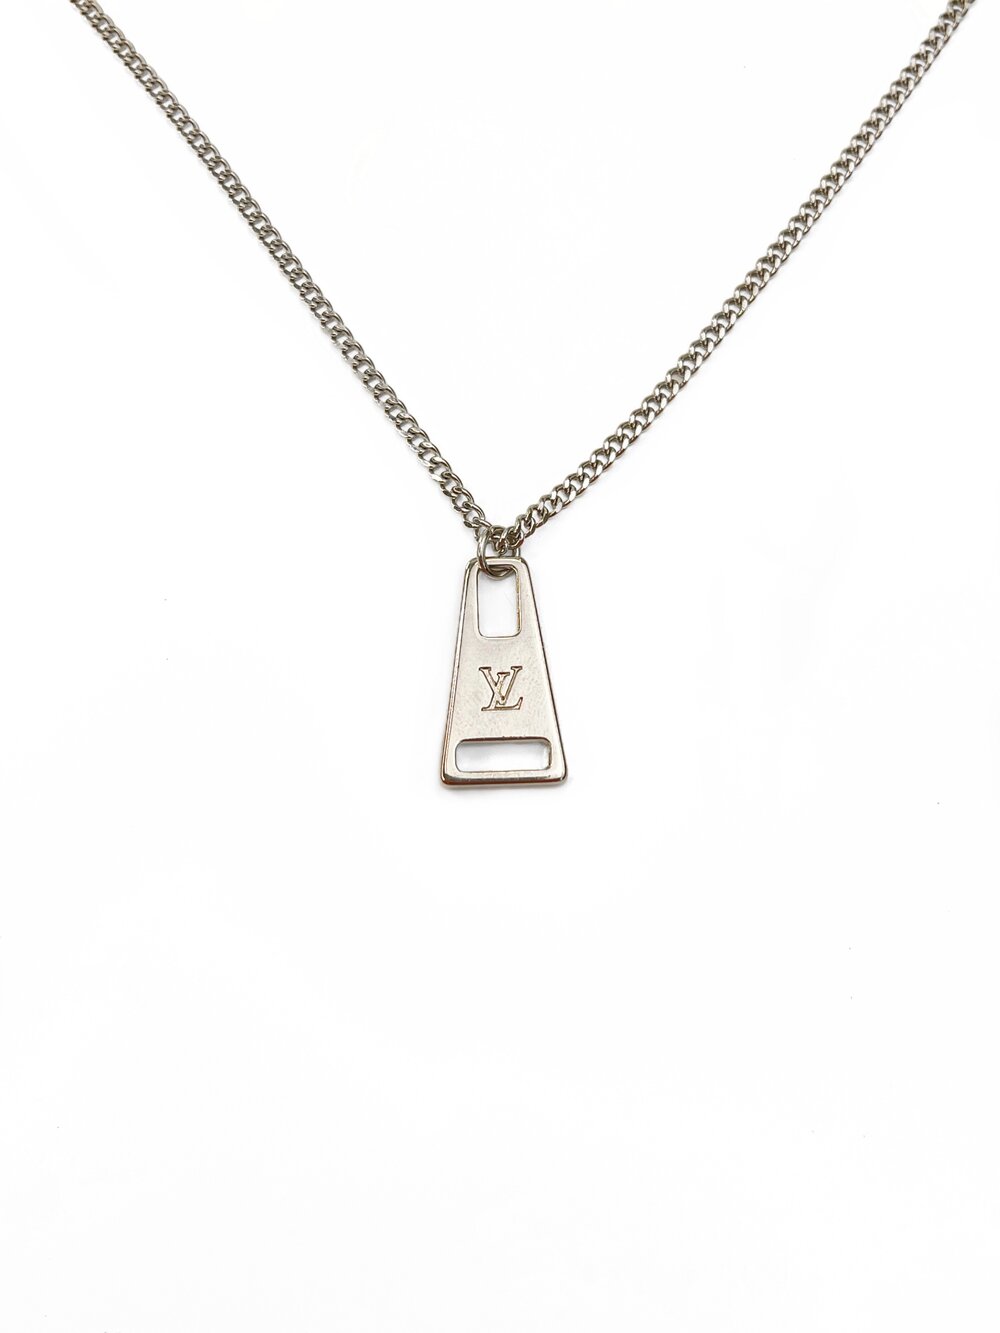 Authentic Louis Vuitton Repurposed Silver Zipper Necklace — LUXE Reworked